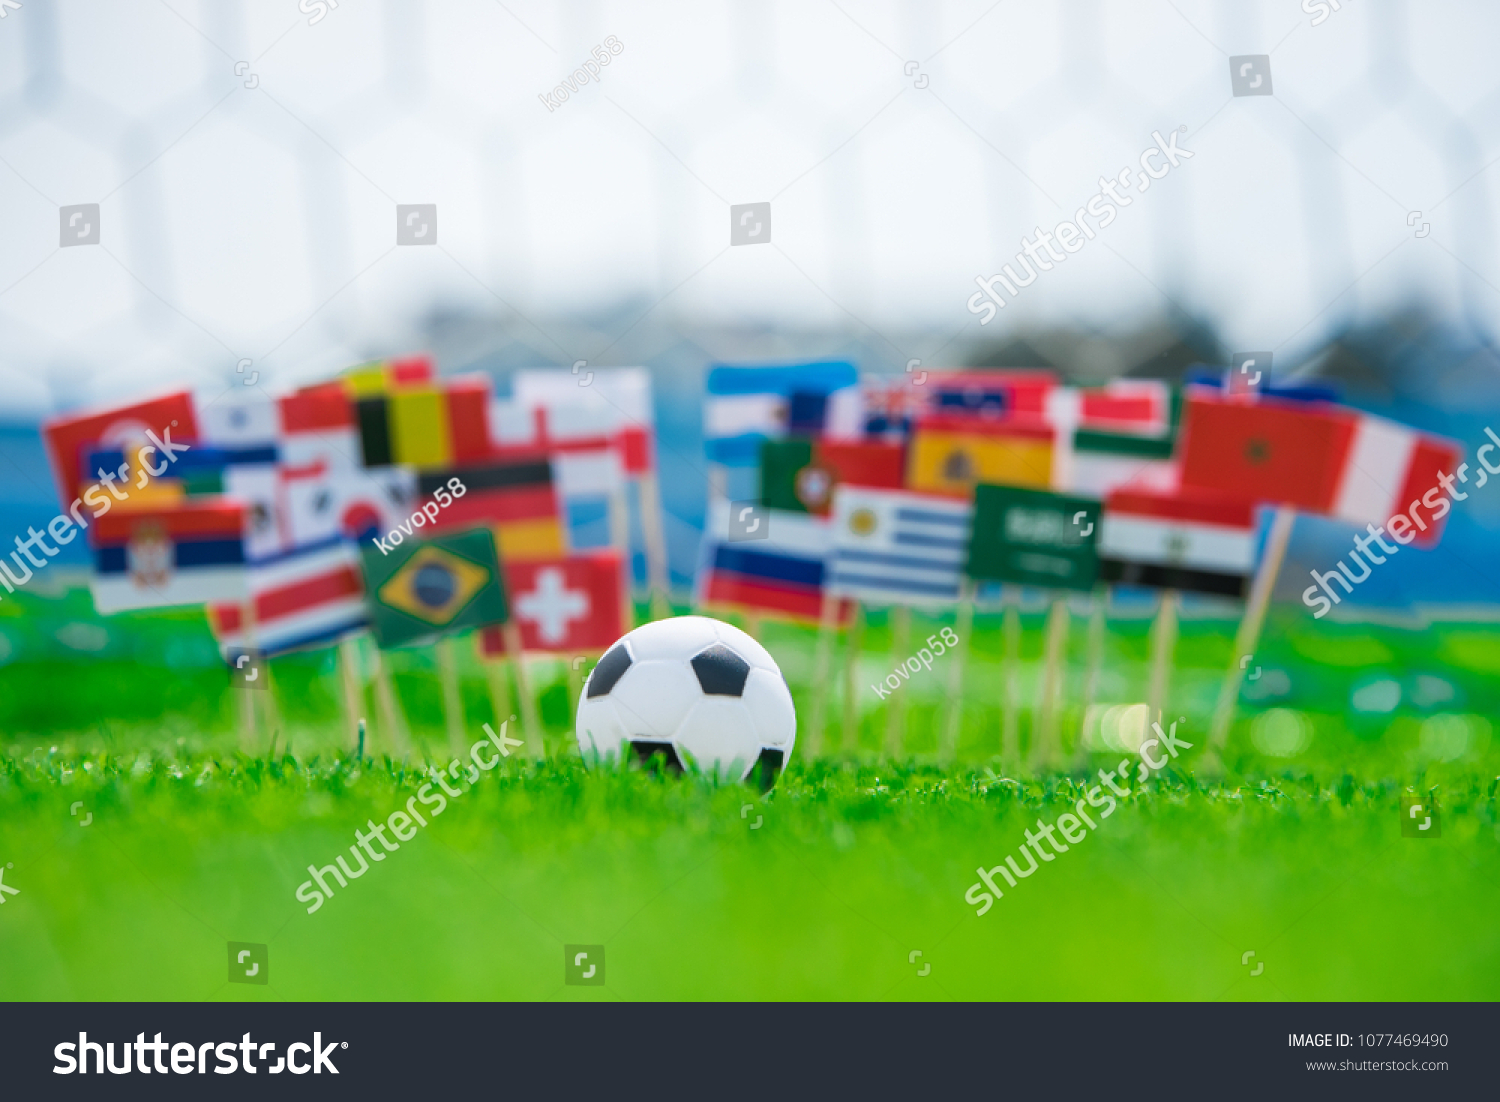 All Flags of Football. Football net in background. Flags on football pitch, tournament photo. Fans, support concept photo #1077469490